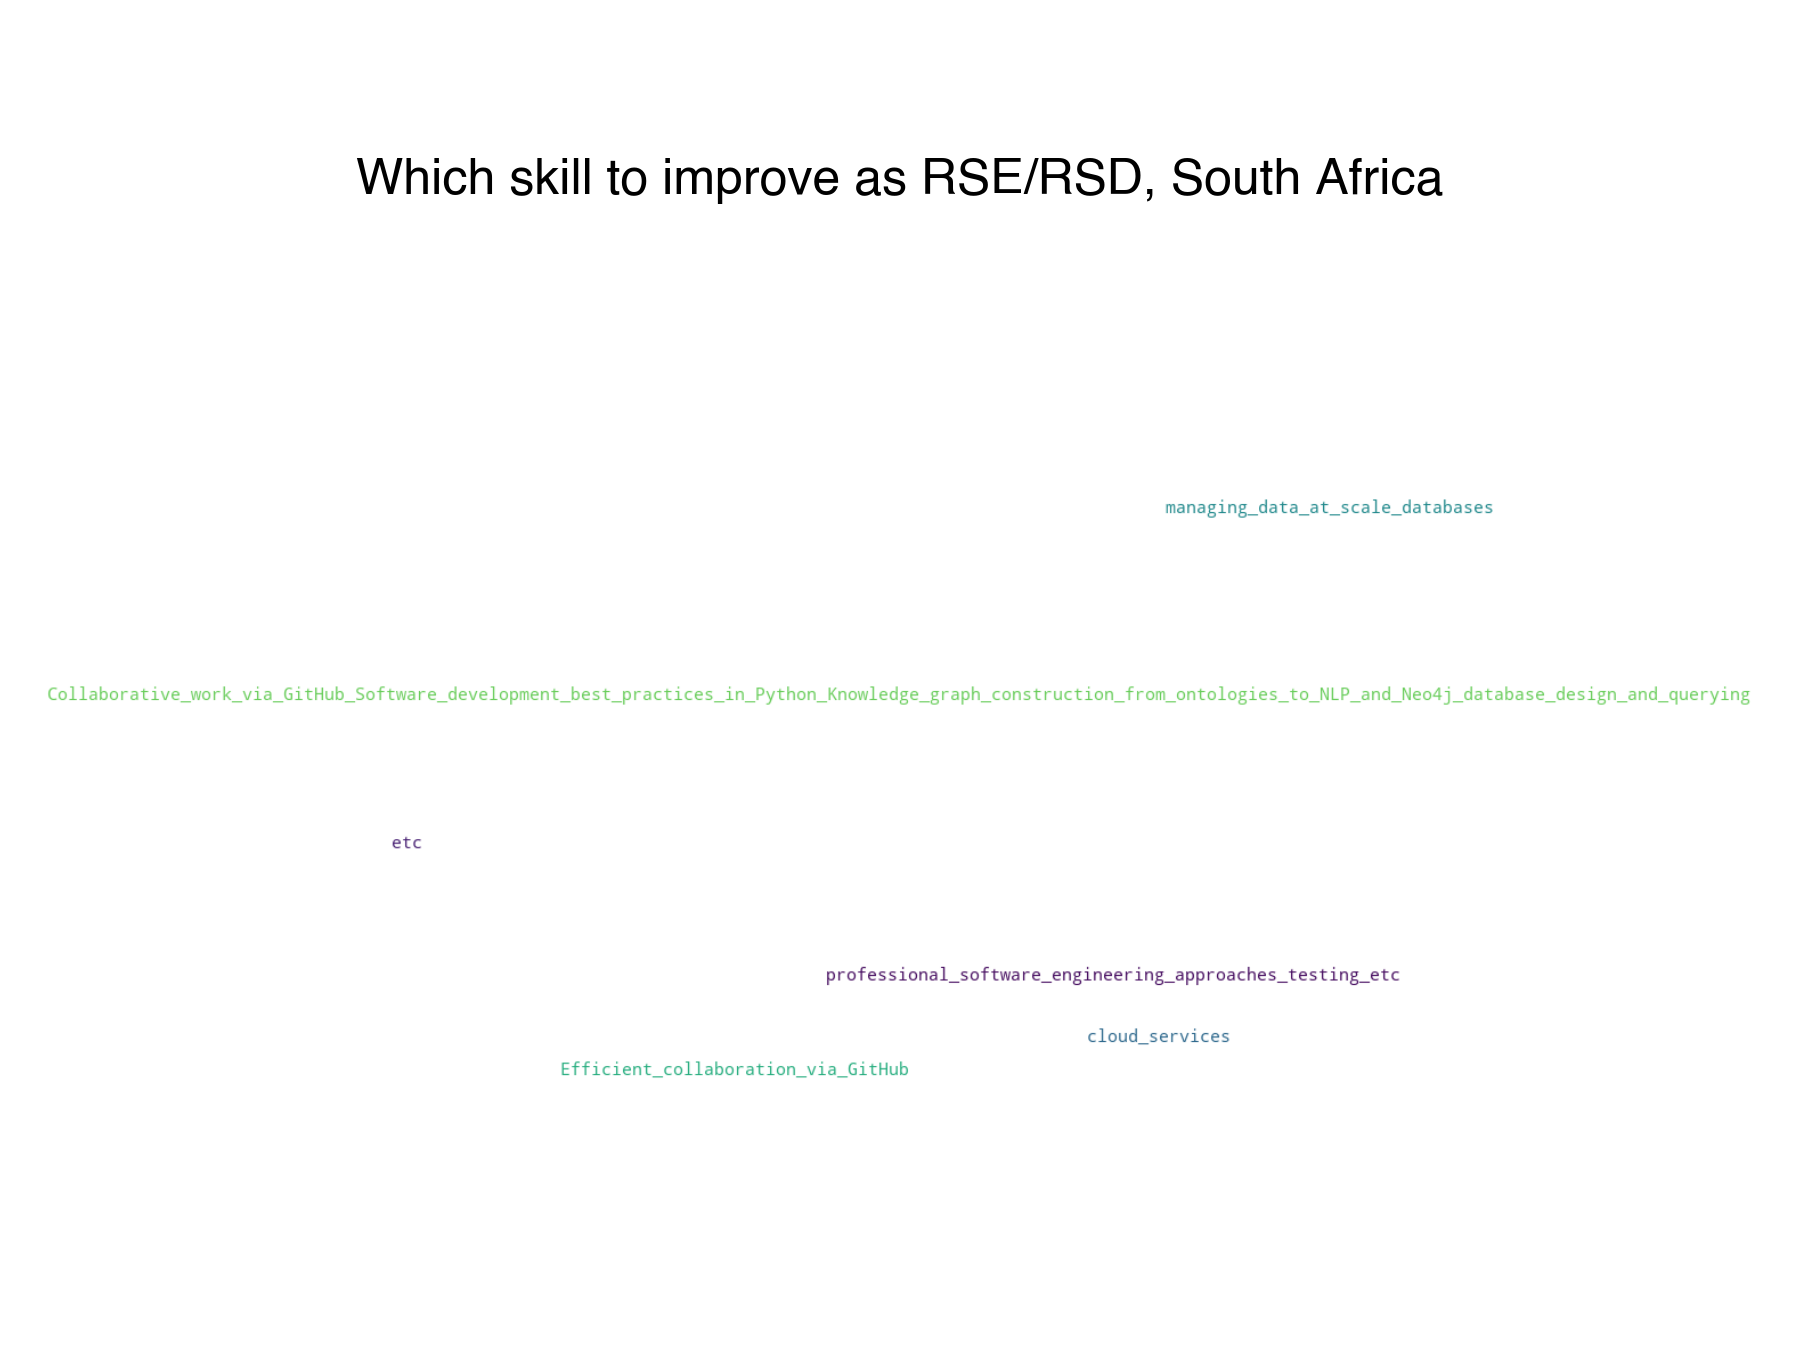 which-skills-to-improve-rse-rsd-wordcloud